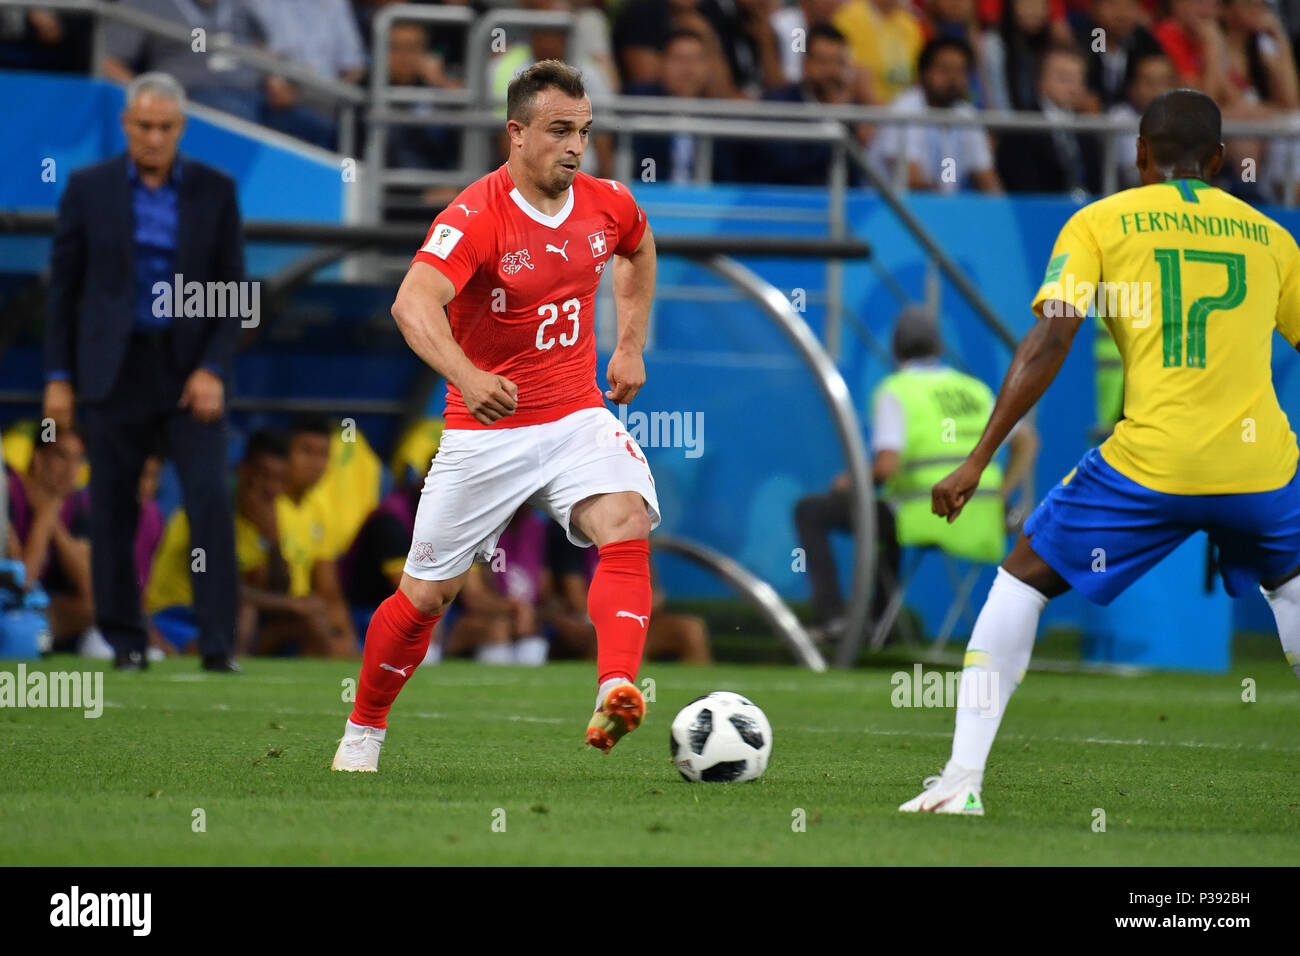 Rostov On Don, Russland. 17th June, 2018. Xherdan SHAQIRI (SUI) on the ball, action, individual action, single image, cut out, full body, whole figure. Brazil (BRA) -Switzerland (SUI) 1-1, Preliminary Round, Group E, match 09, on 17.06.2018 in Rostov-on-Don, Rostov Arena. Football World Cup 2018 in Russia from 14.06. - 15.07.2018. | usage worldwide Credit: dpa/Alamy Live News Stock Photo